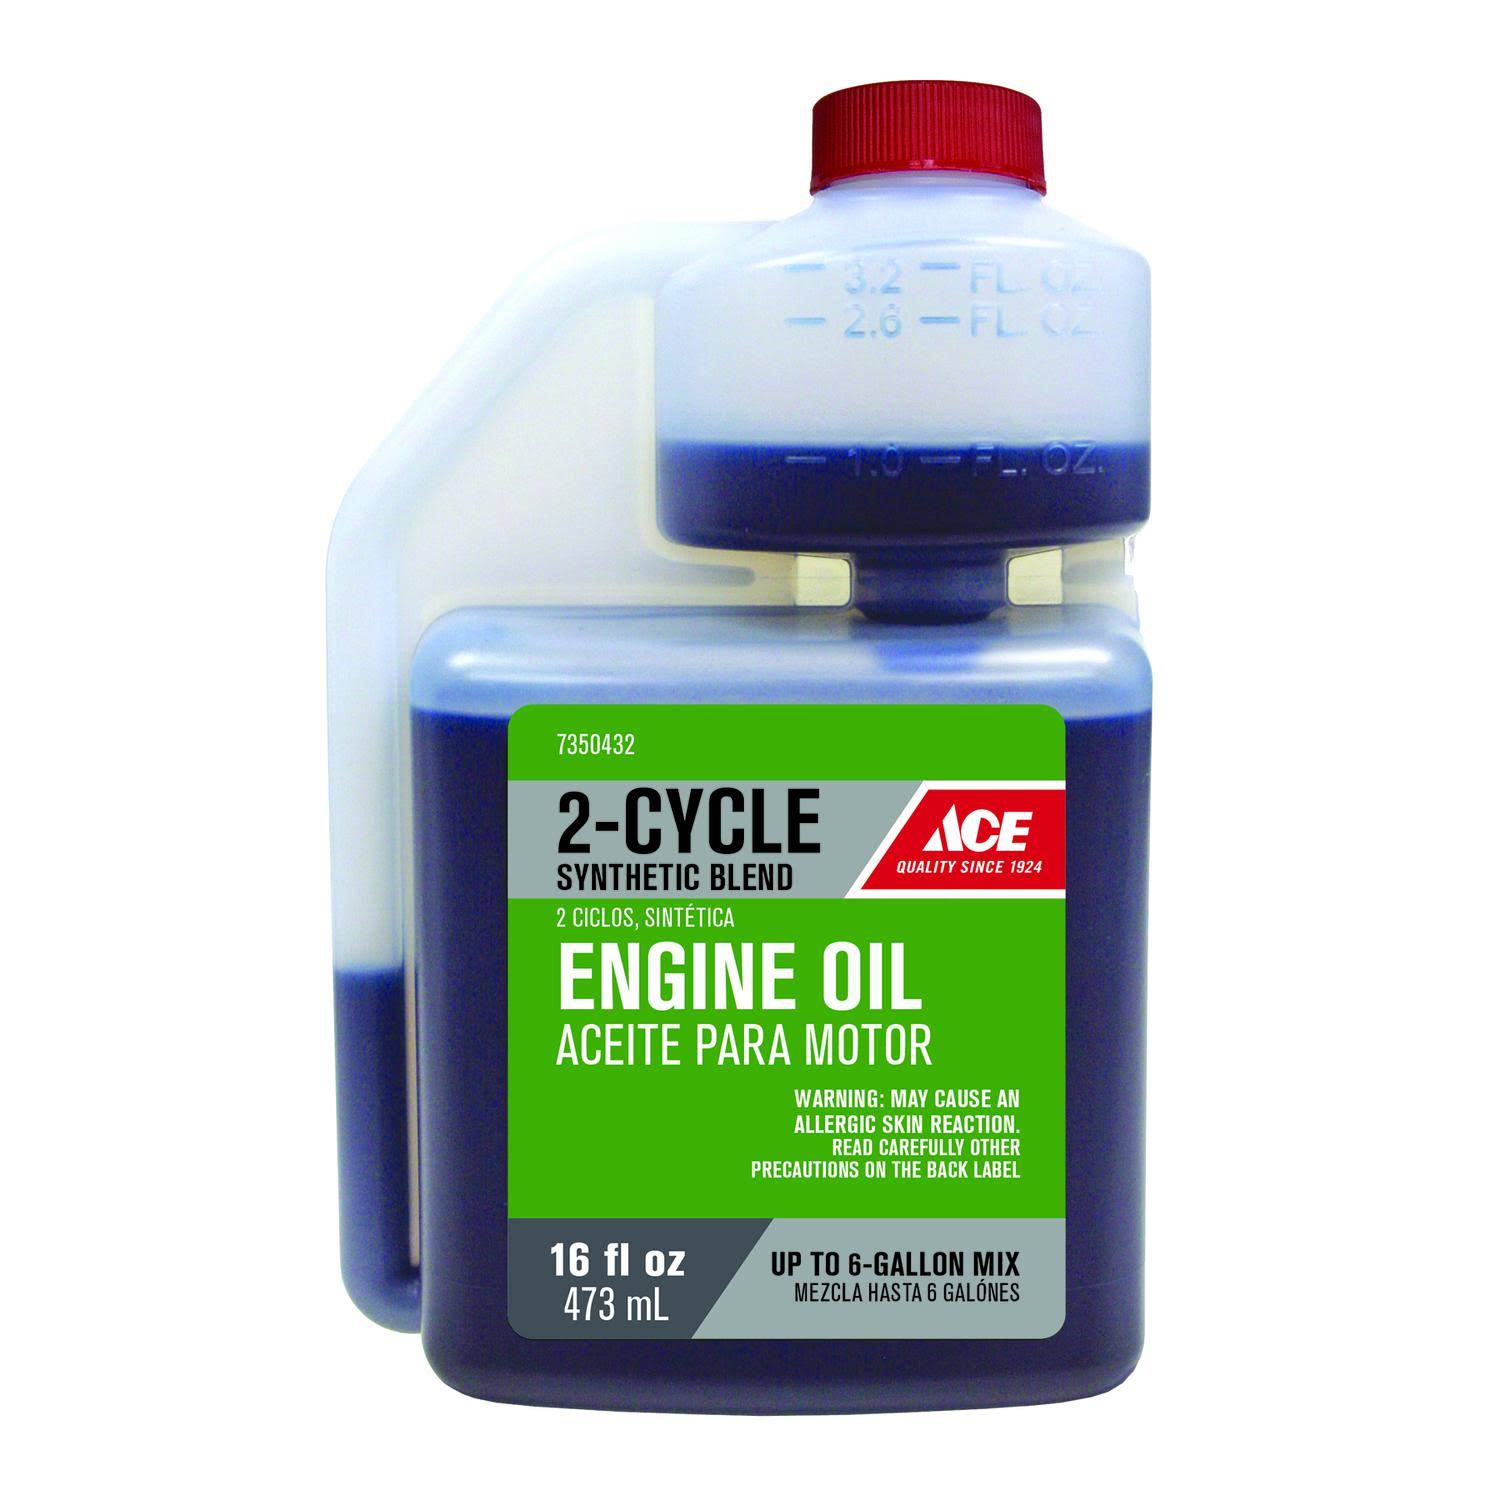 Ace 2-Cycle Synthetic Blend Engine Oil